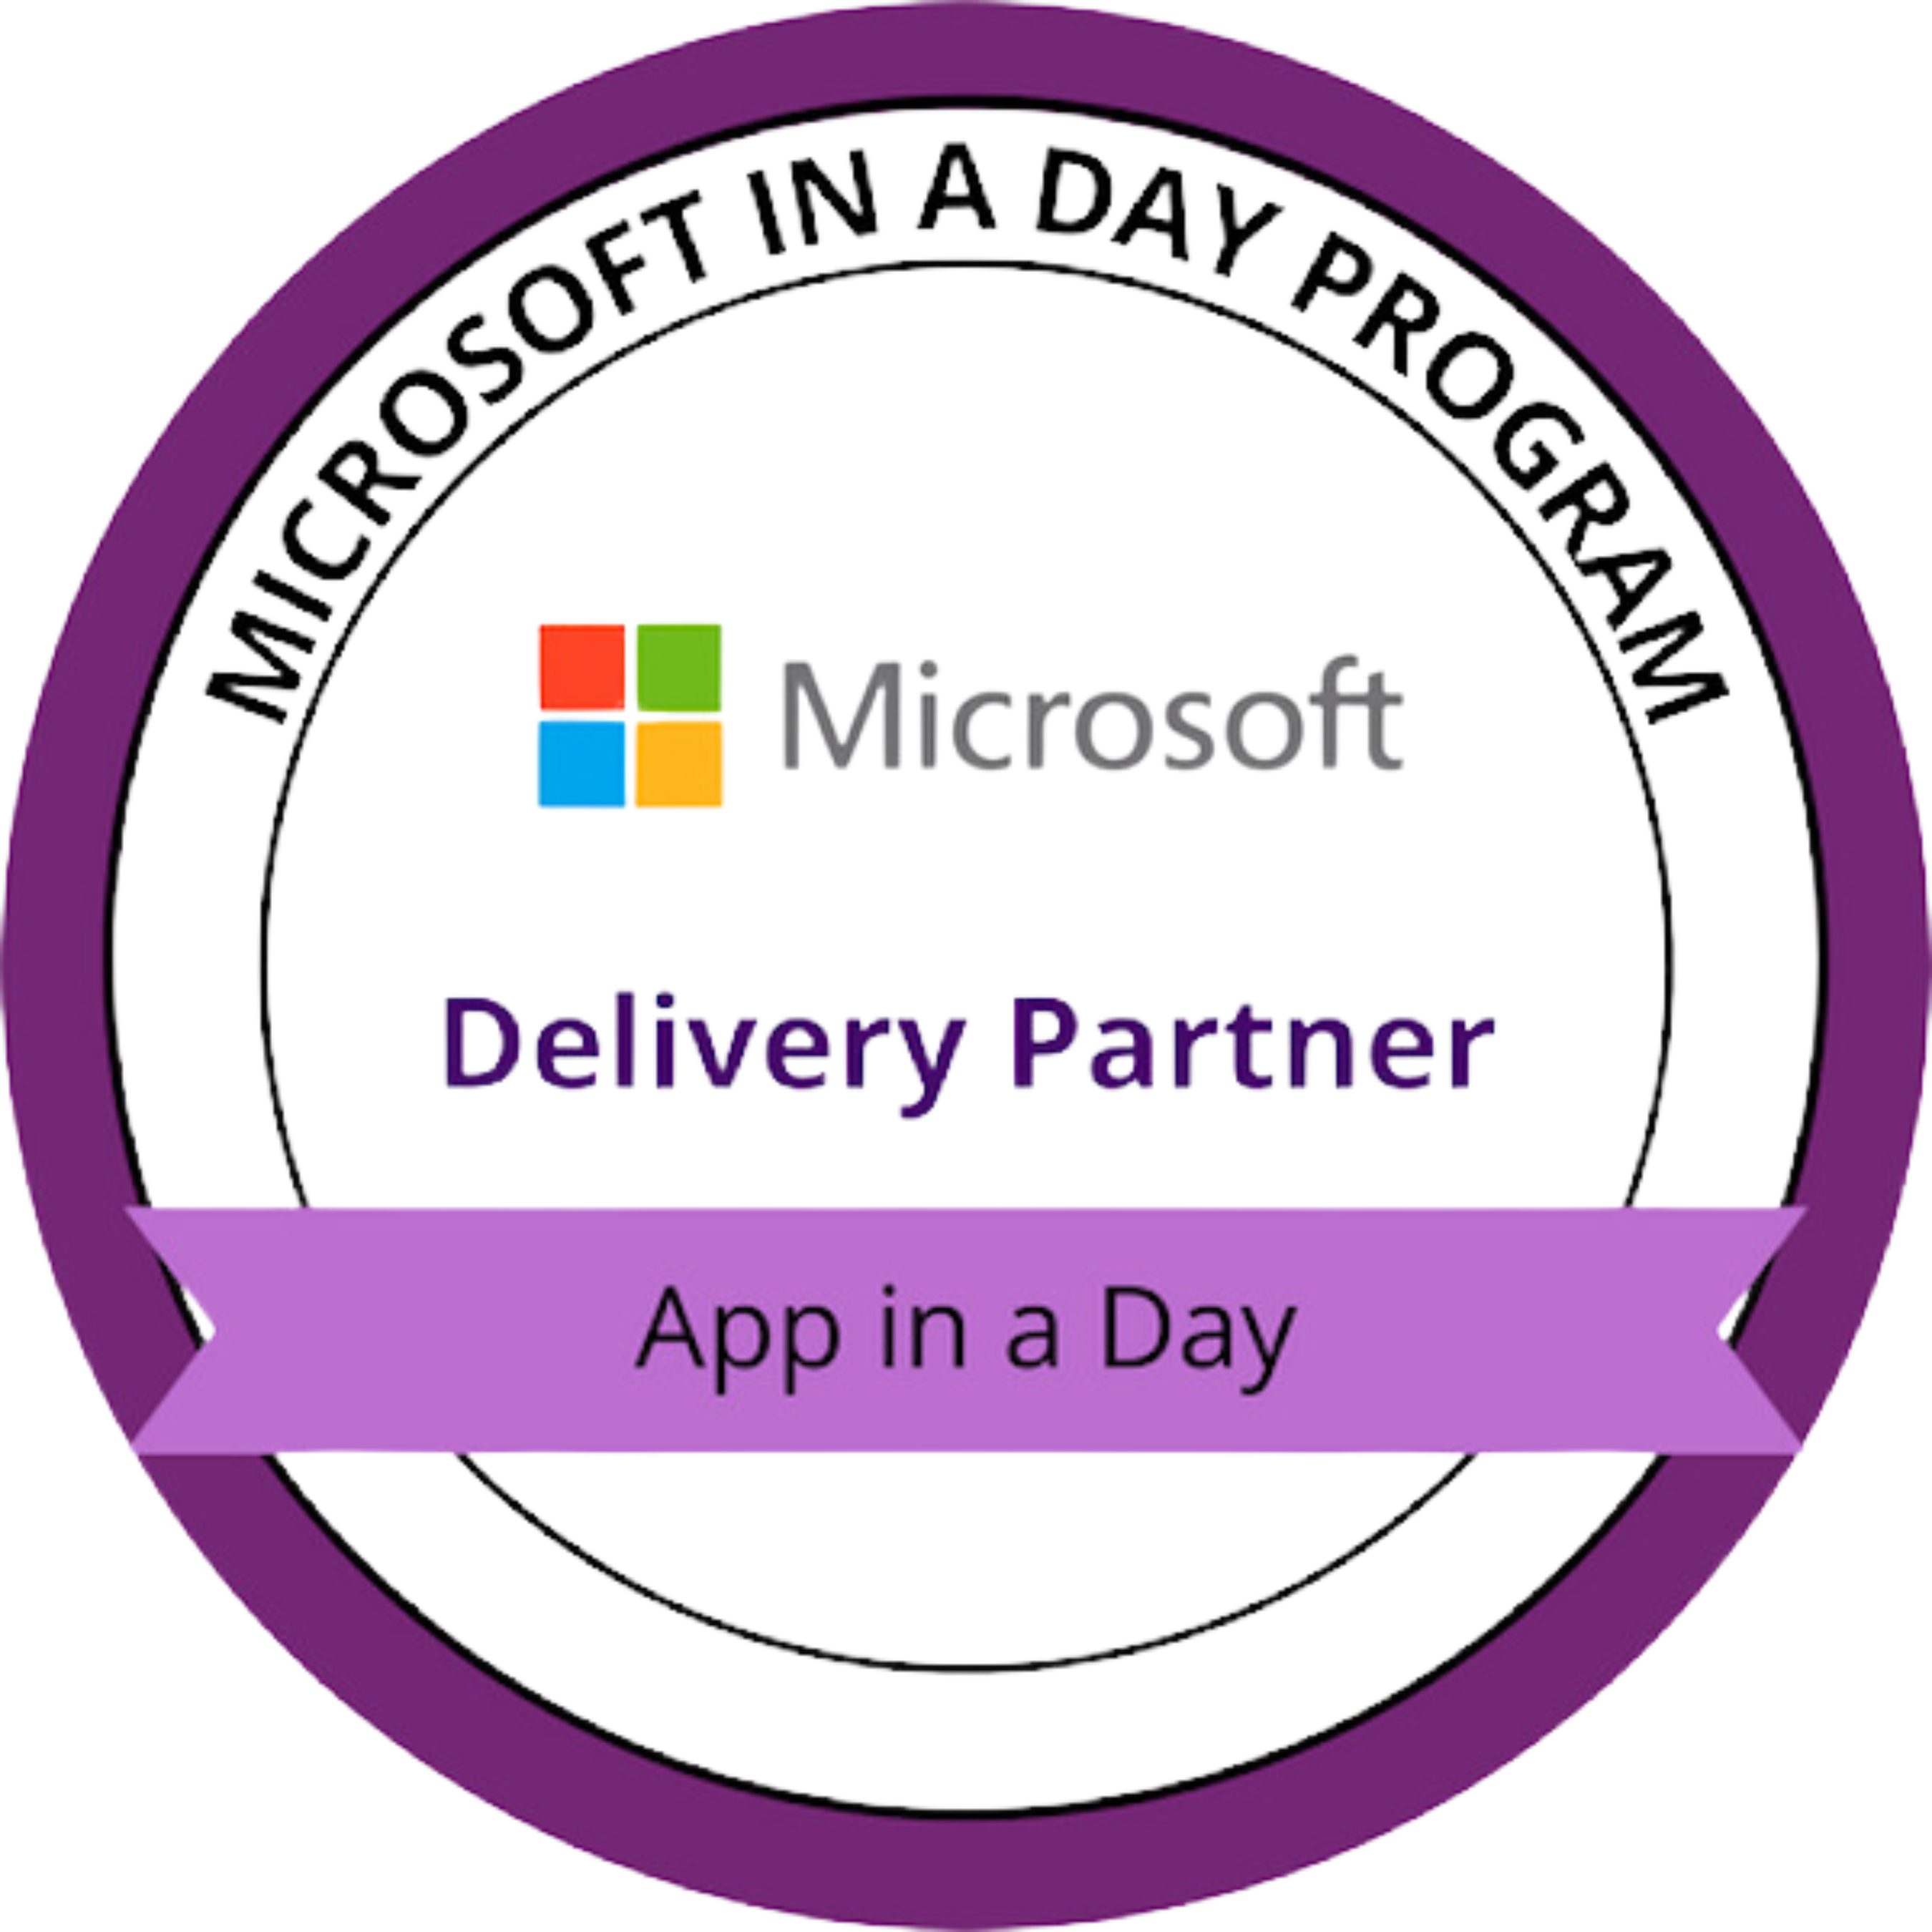 App in a Day Delivery Partner